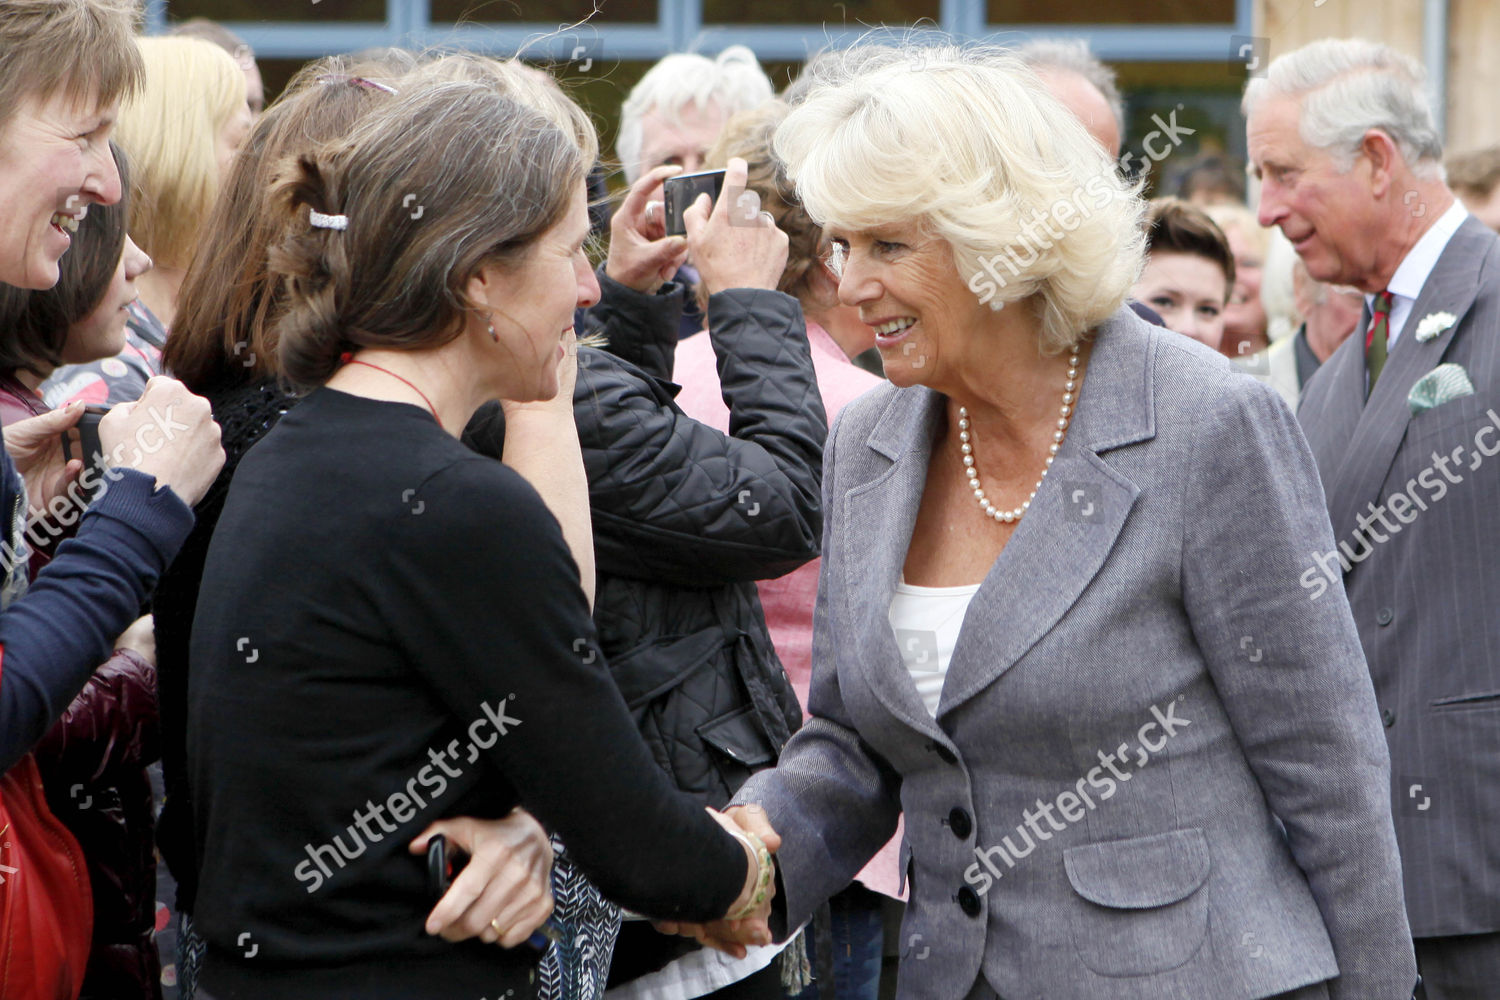 prince-charles-and-camilla-duchess-of-cornwall-visit-the-rhug-estate-in-denbighshire-wales-britain-shutterstock-editorial-2598511g.jpg